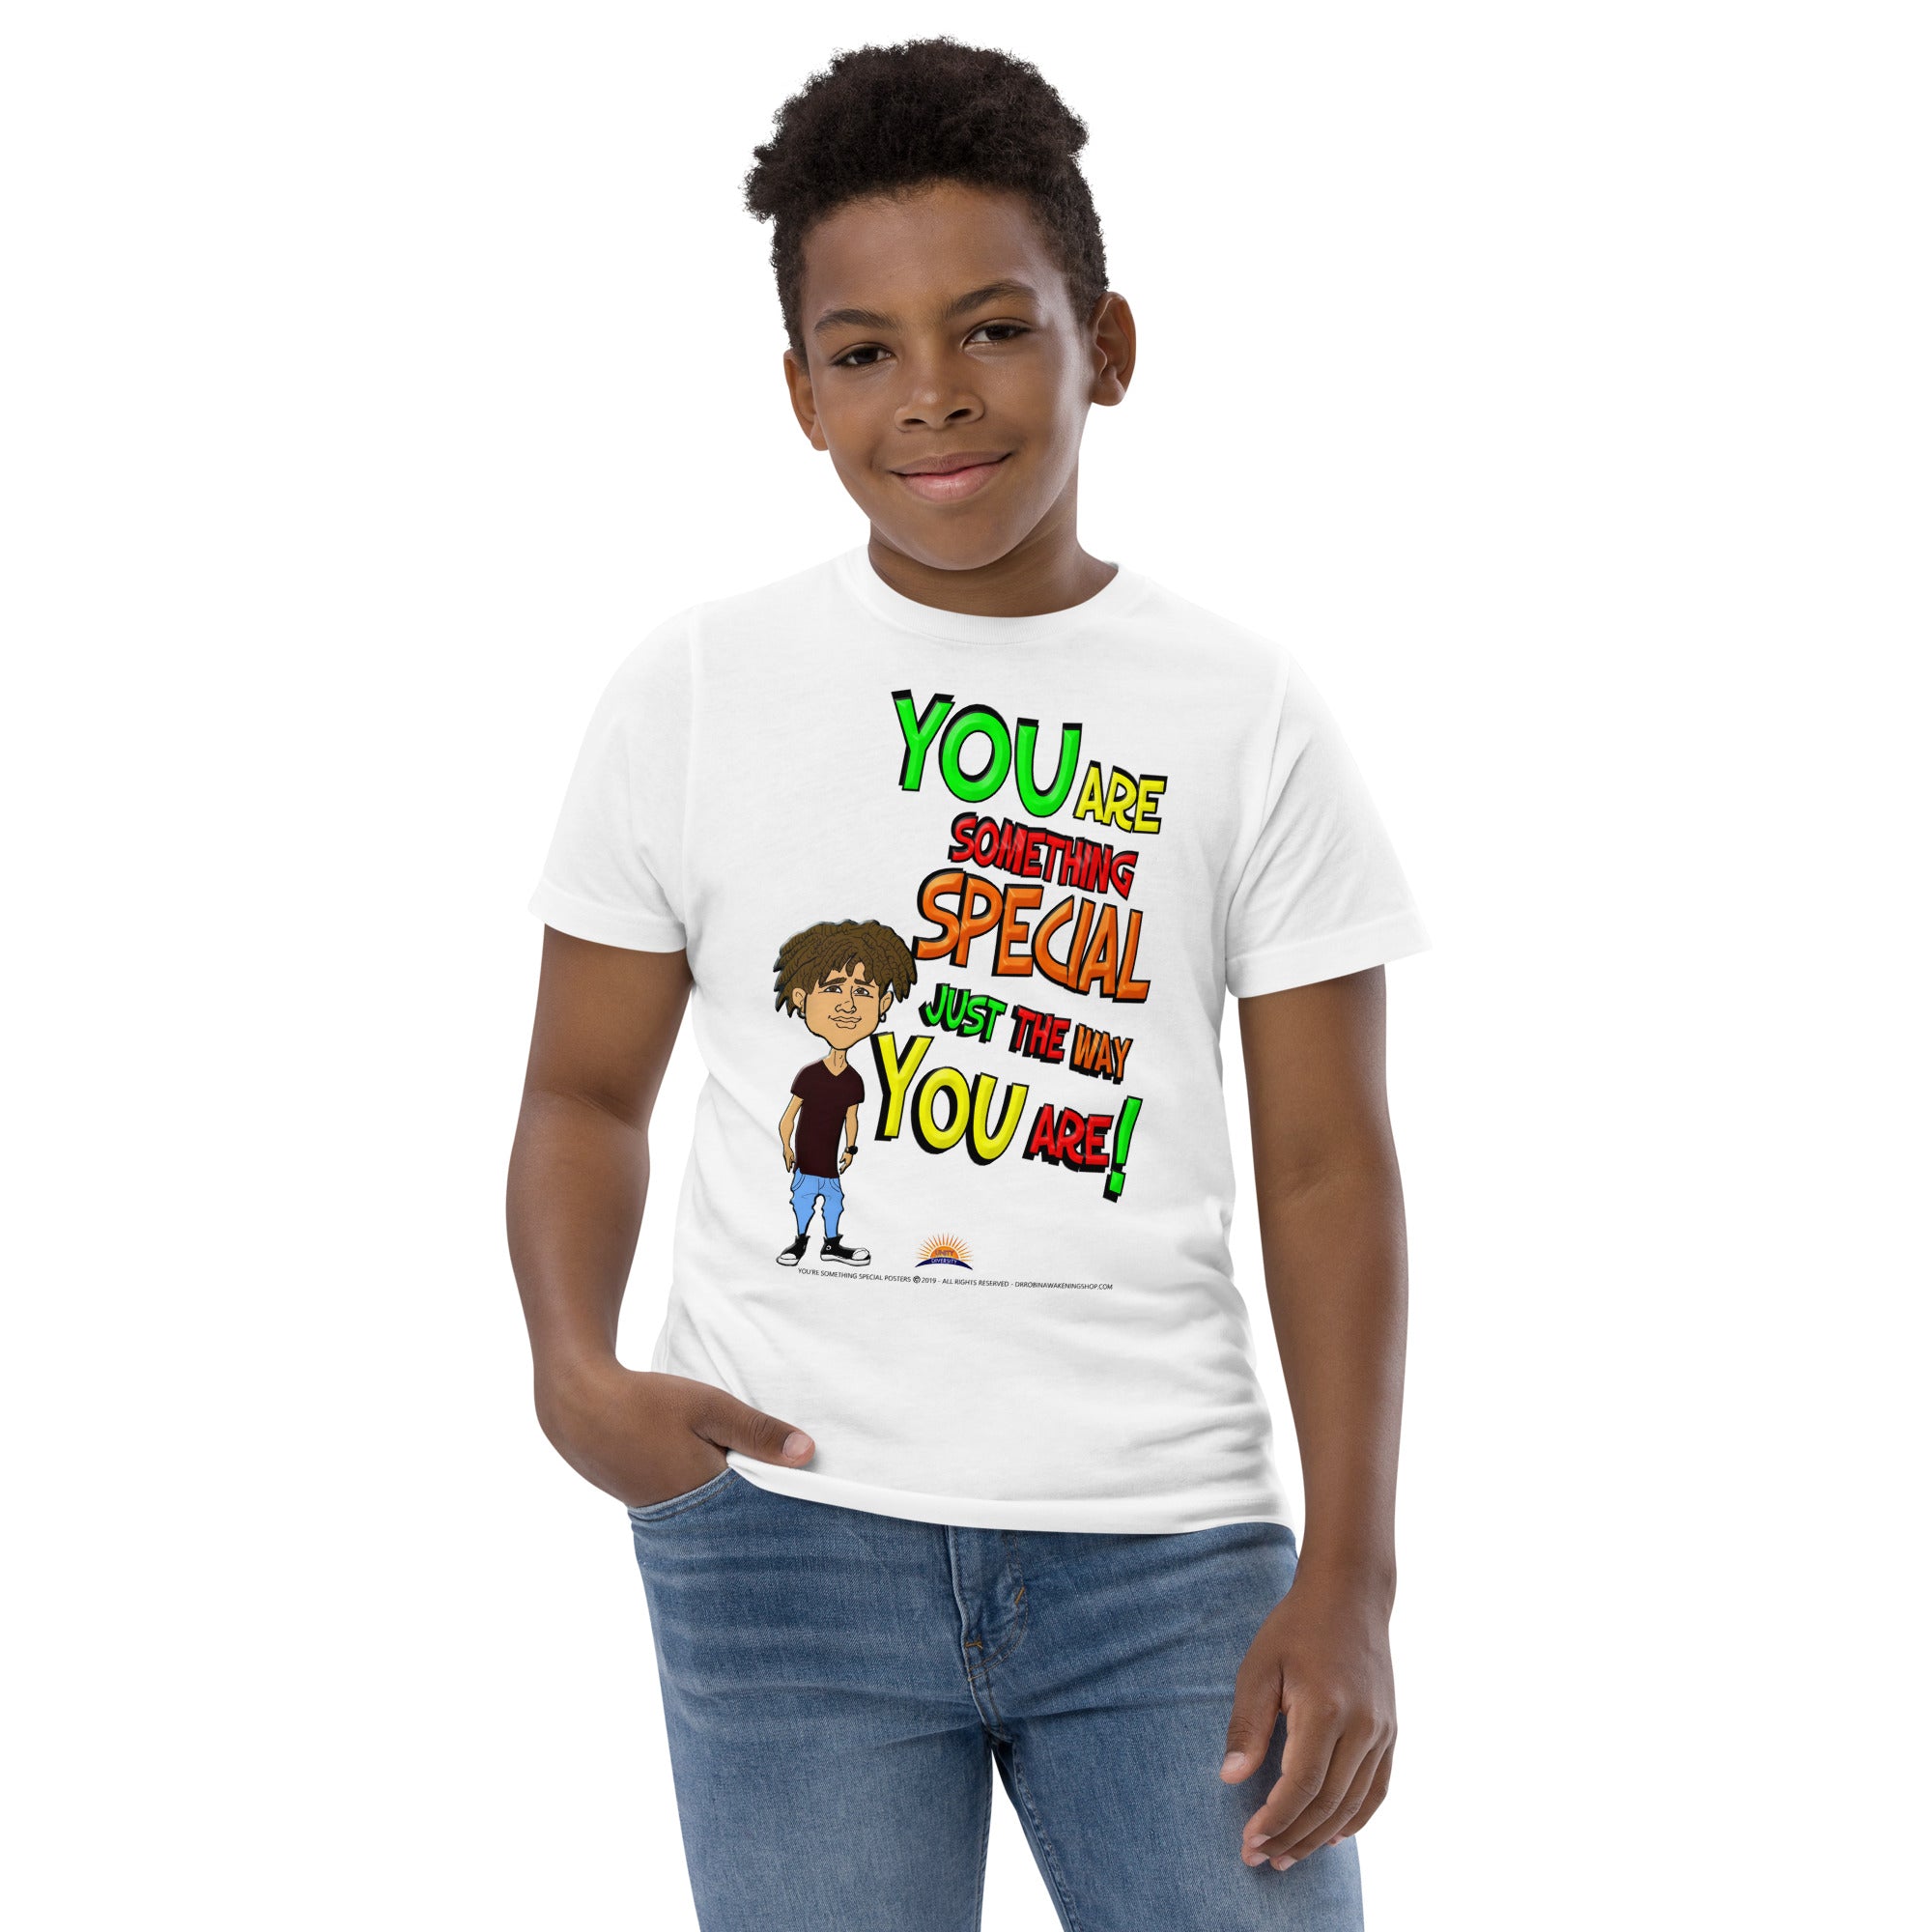 You're Something Special Boy Youth T-Shirt